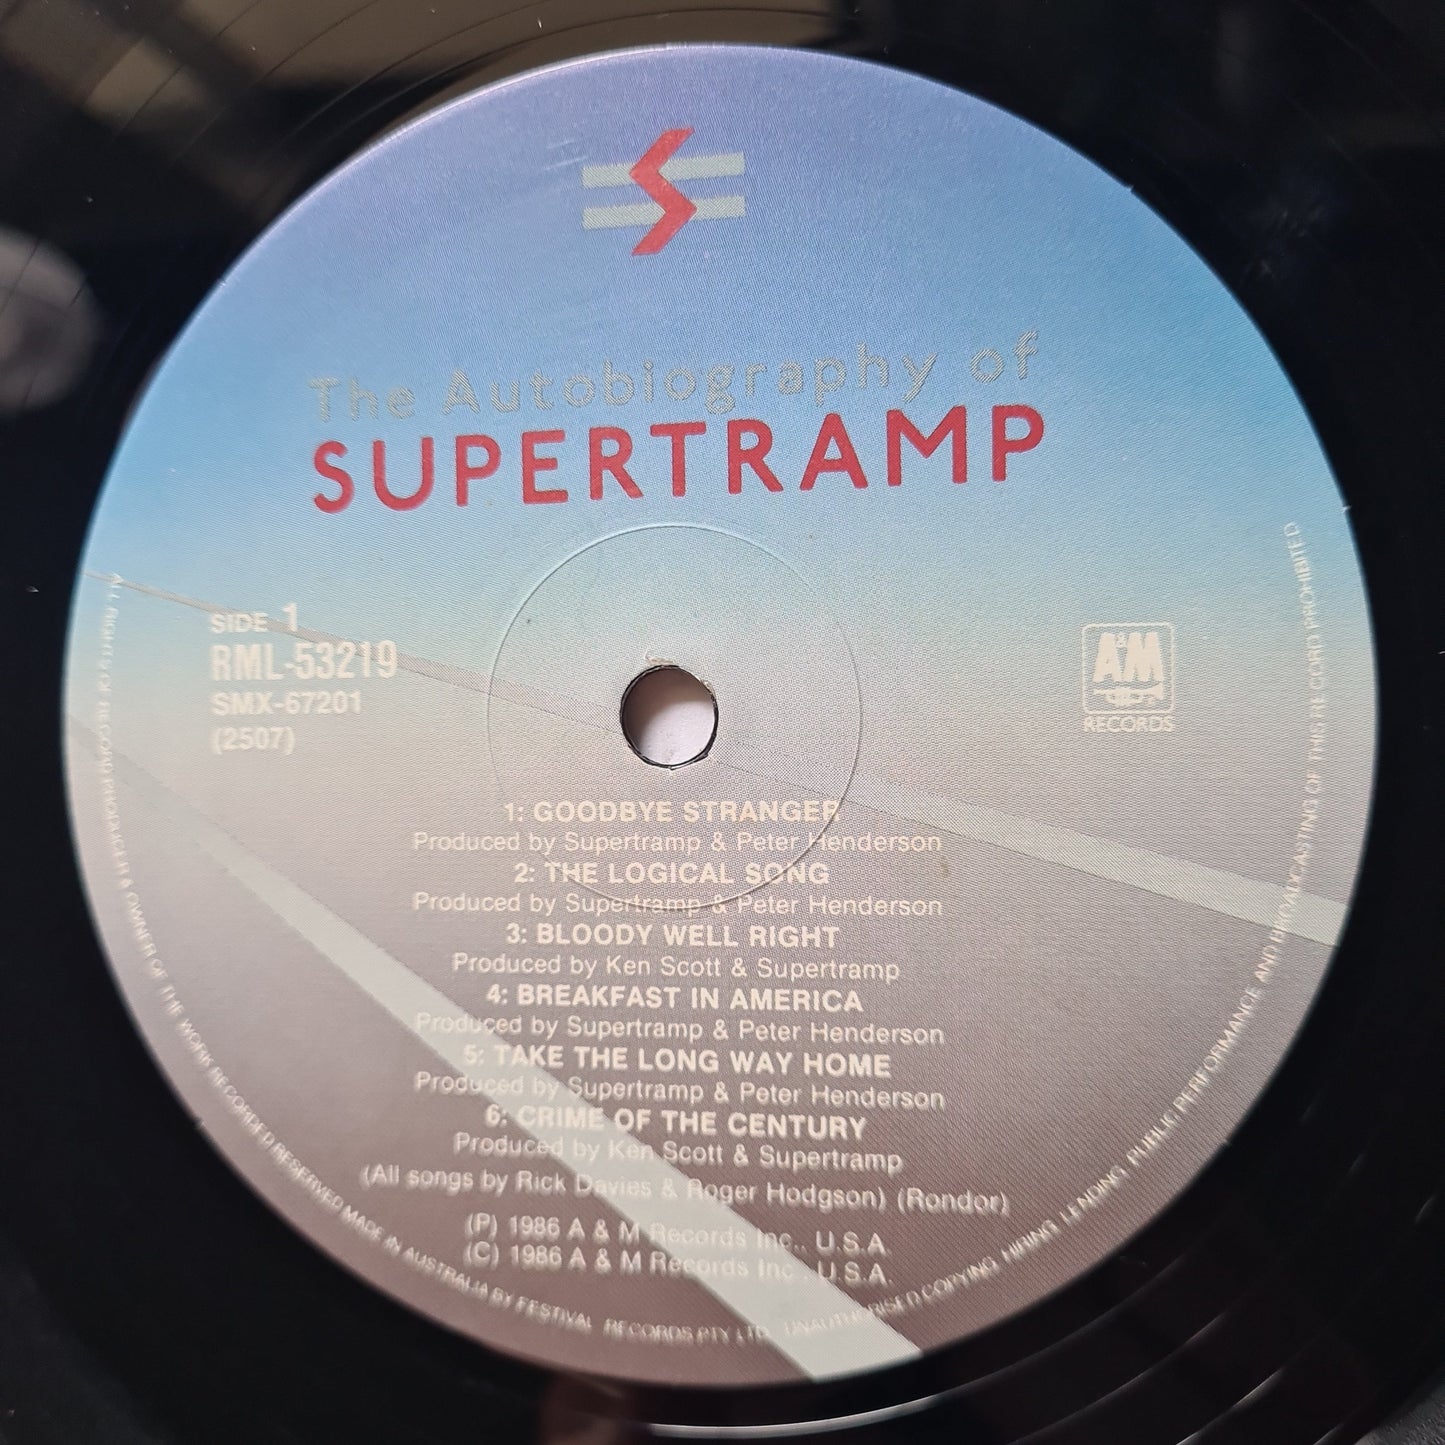 Supertramp – The Autobiography Of Supertramp (Greatest Hits) - 1986 - Vinyl Record